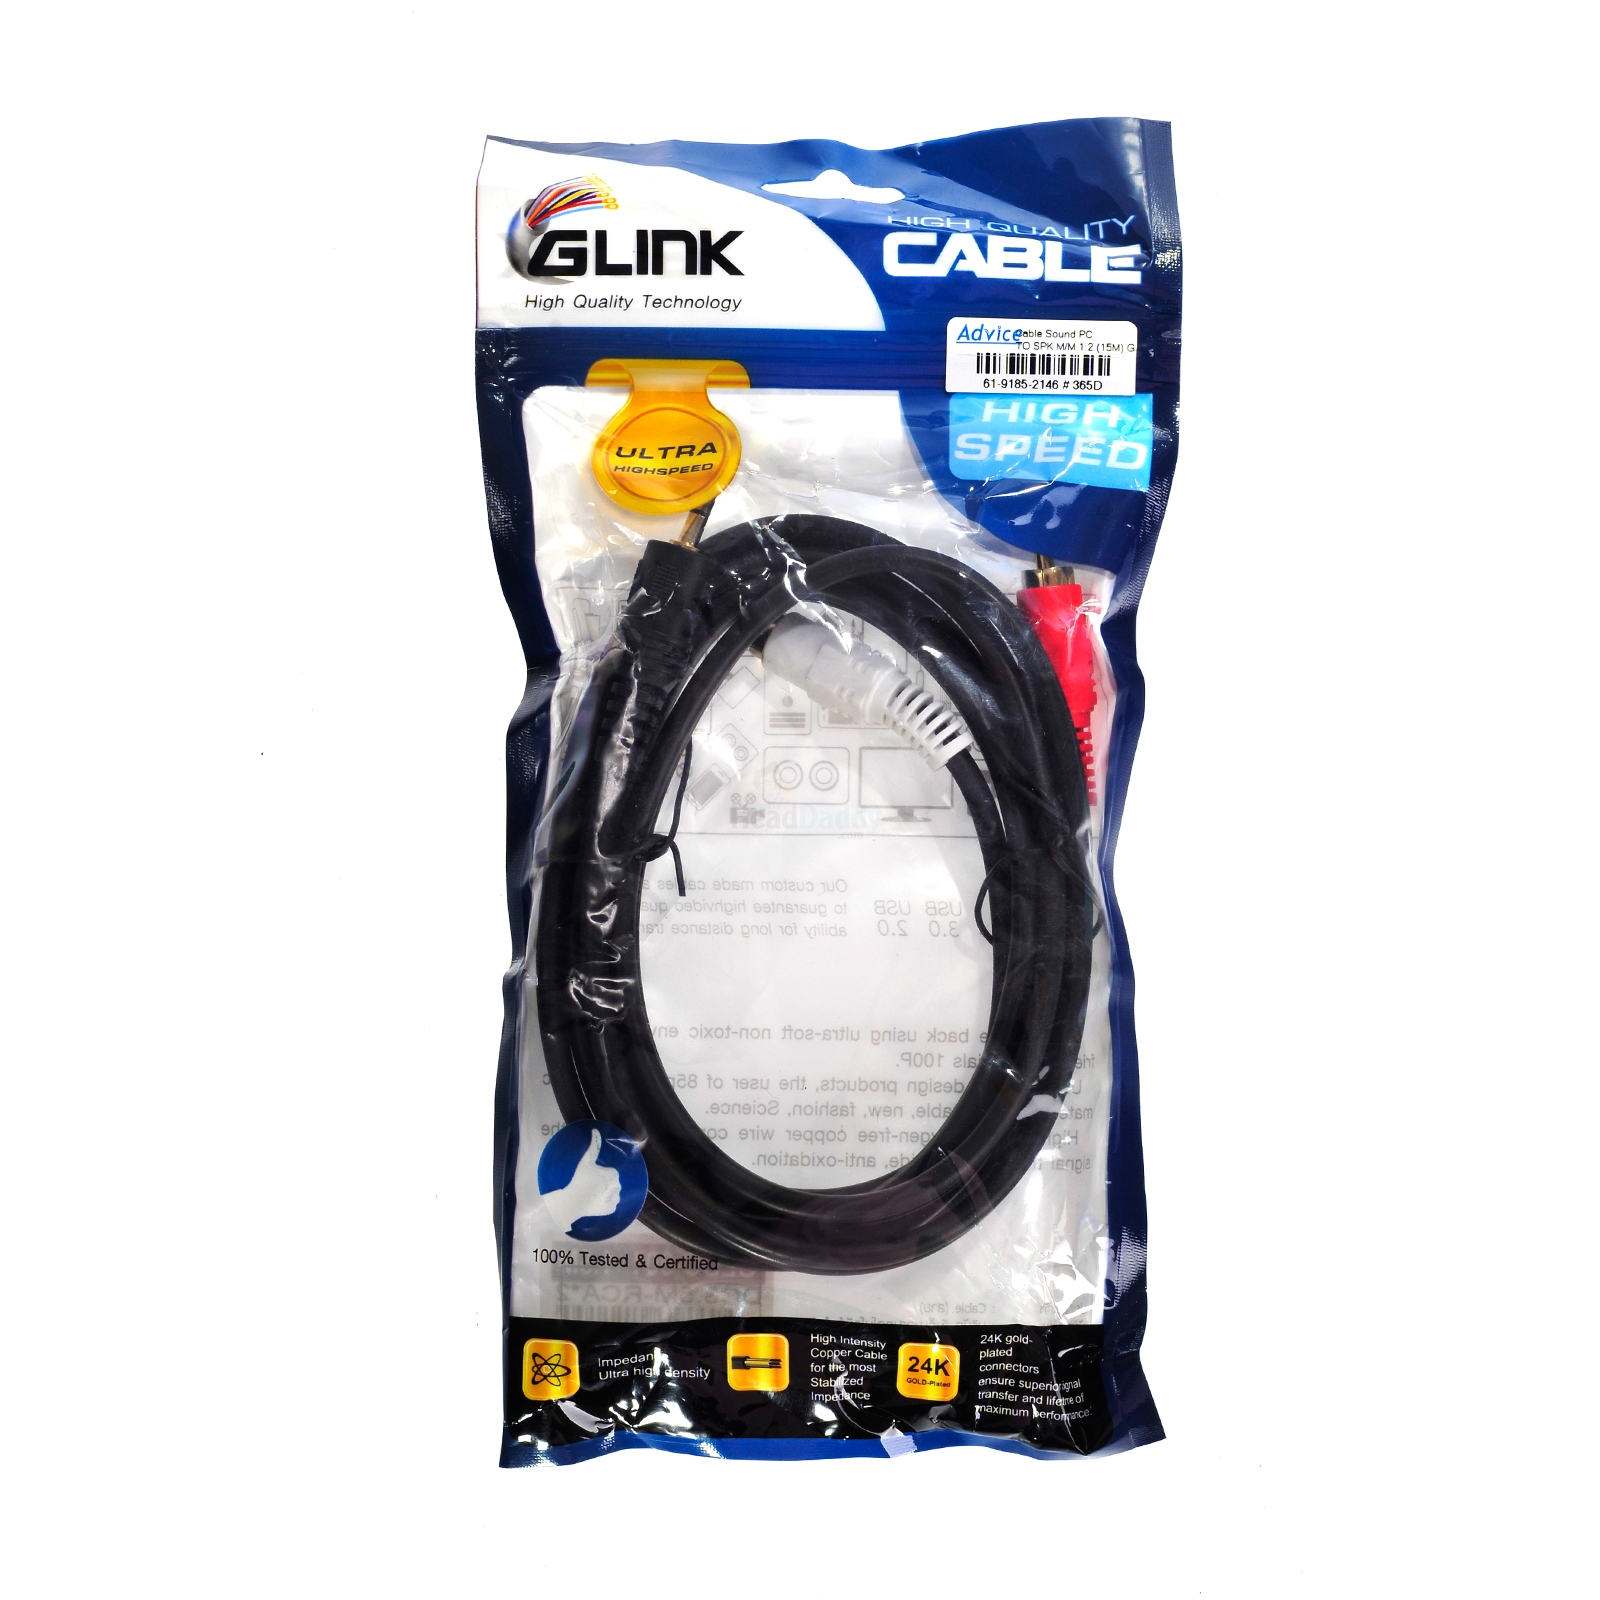 Cable Sound PC TO SPK M/M 1:2 (15M) GOLD GLINK